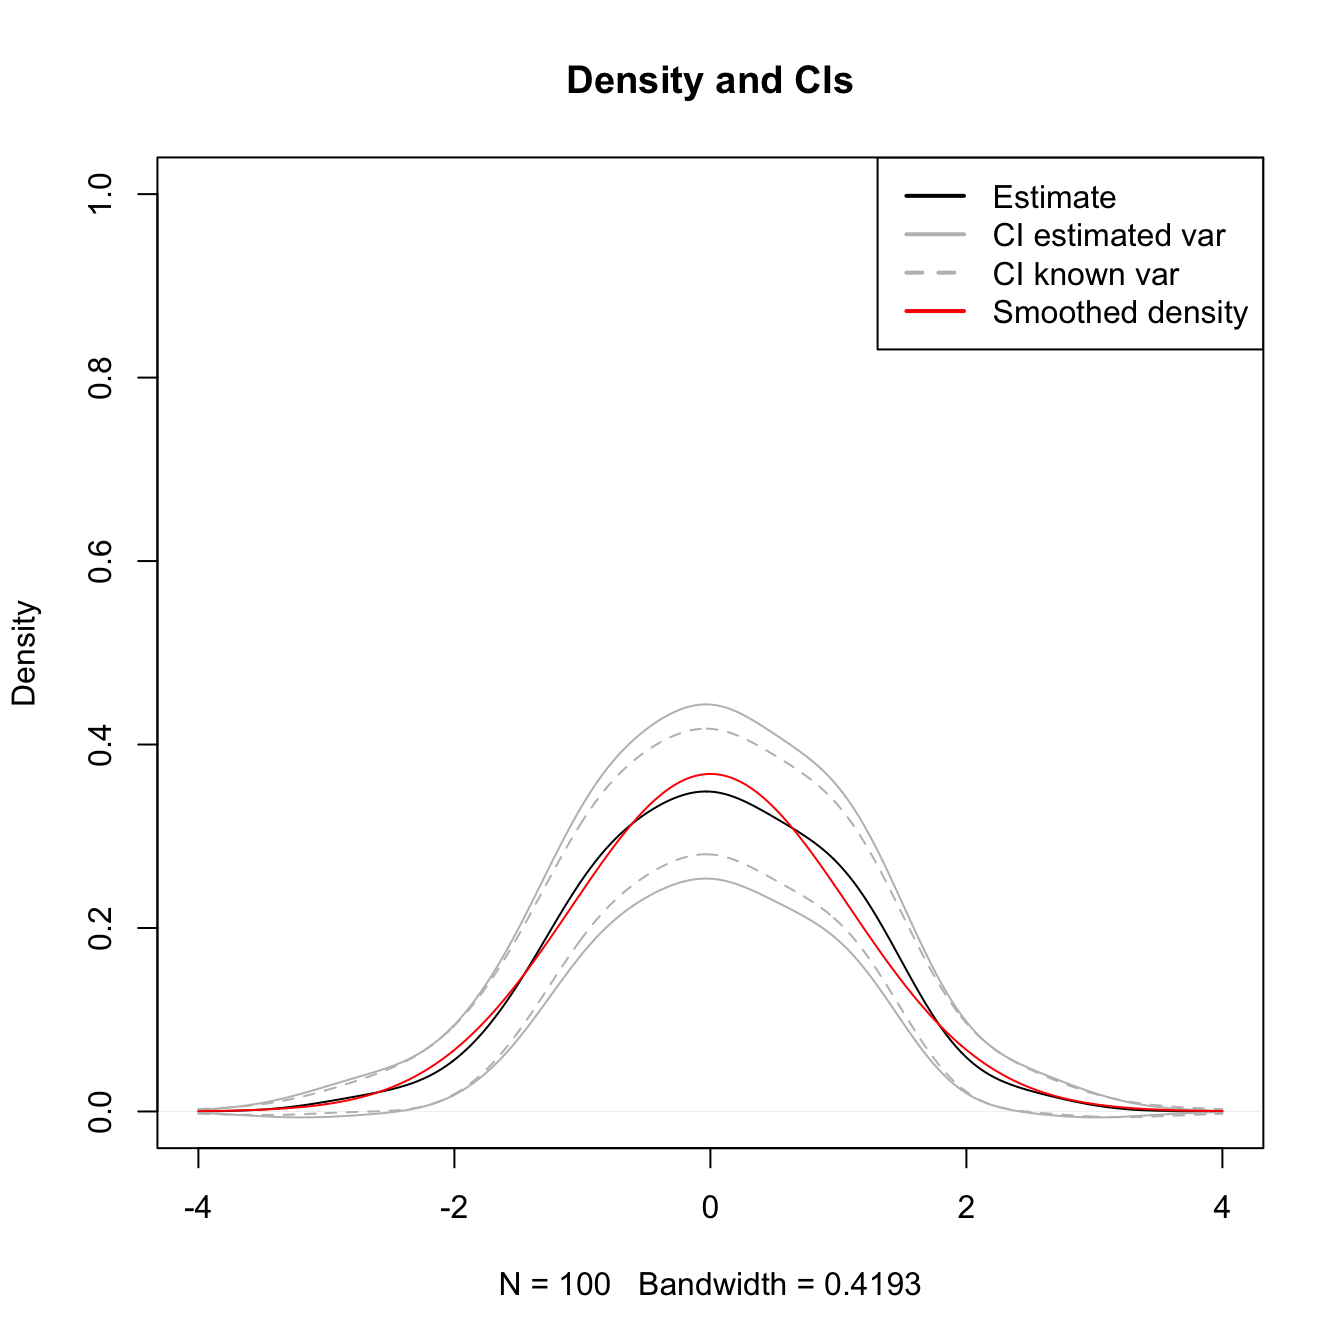 The CIs (A.5) and (A.6) for \(\mathbb{E}\lbrack\hat{f}(x;h)\rbrack\) with estimated and known variances.